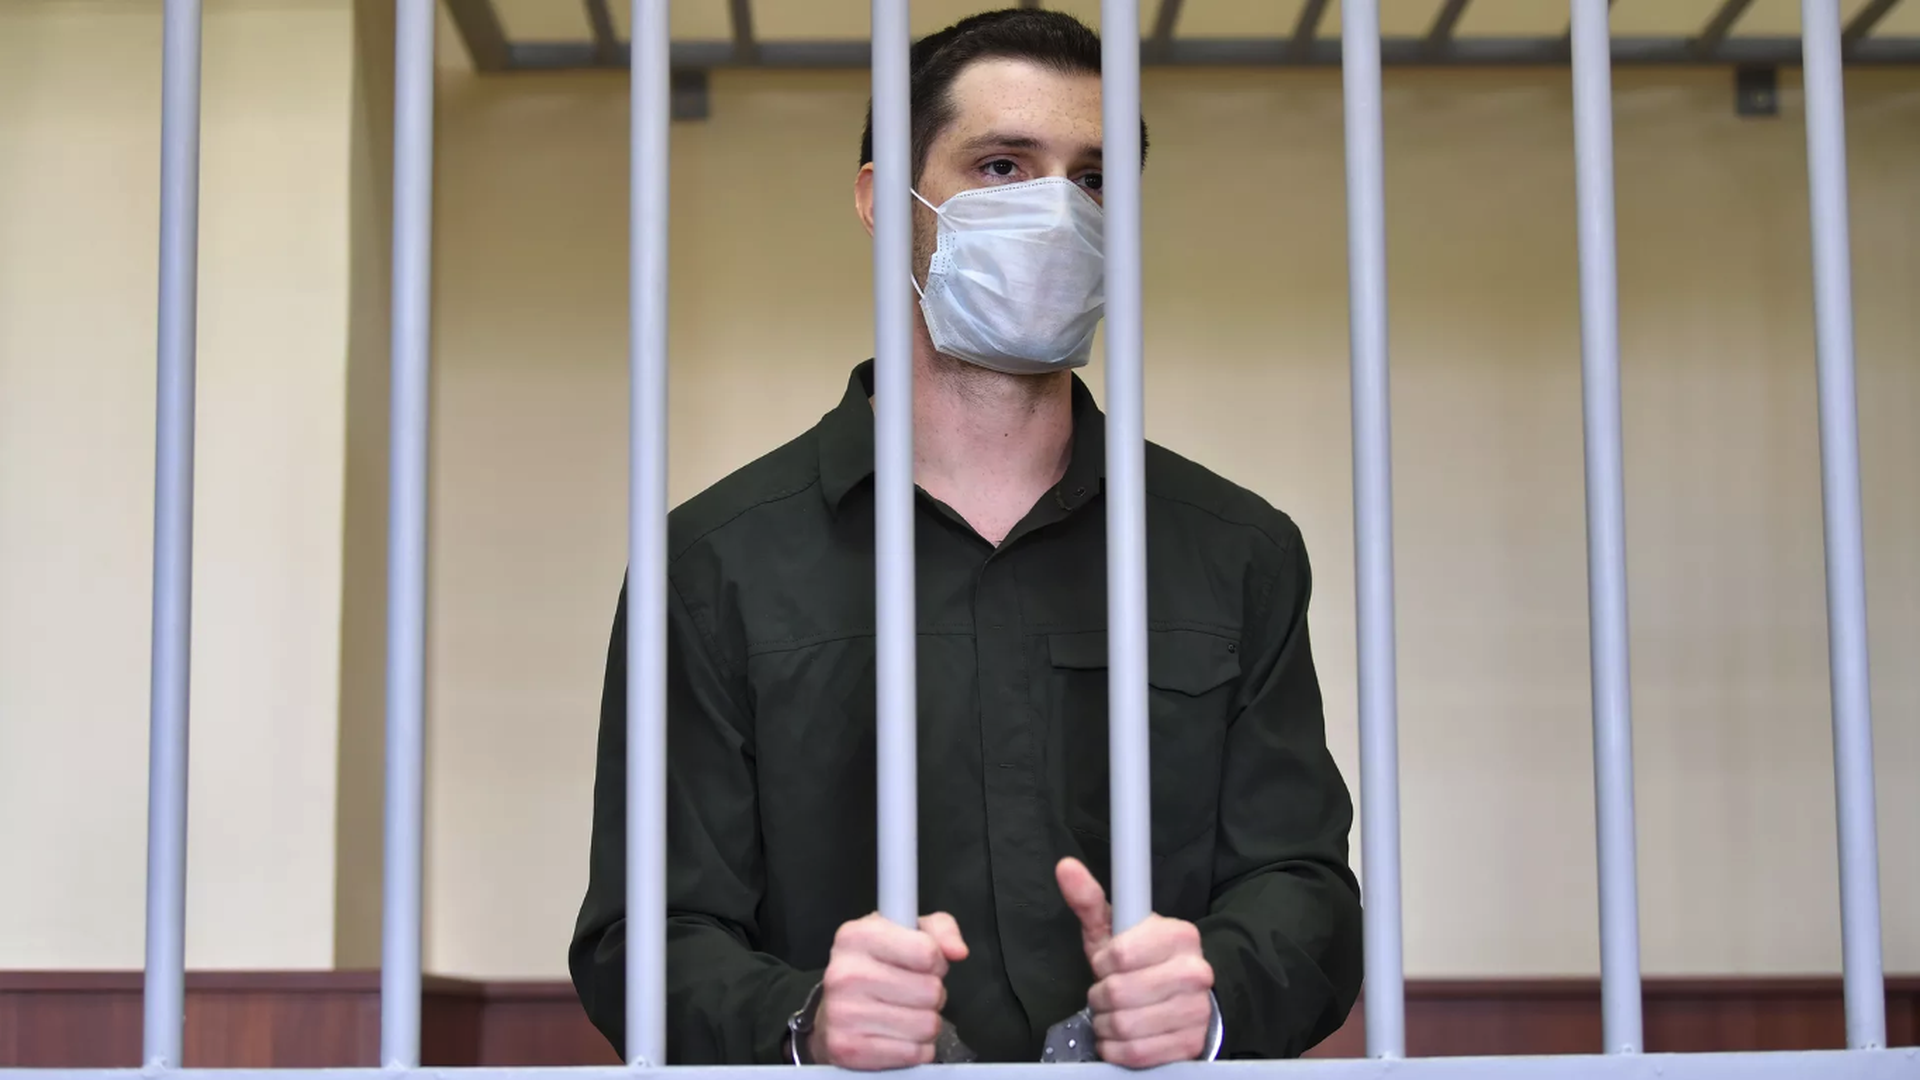 American Trevor Reed behind bars while held in Russia